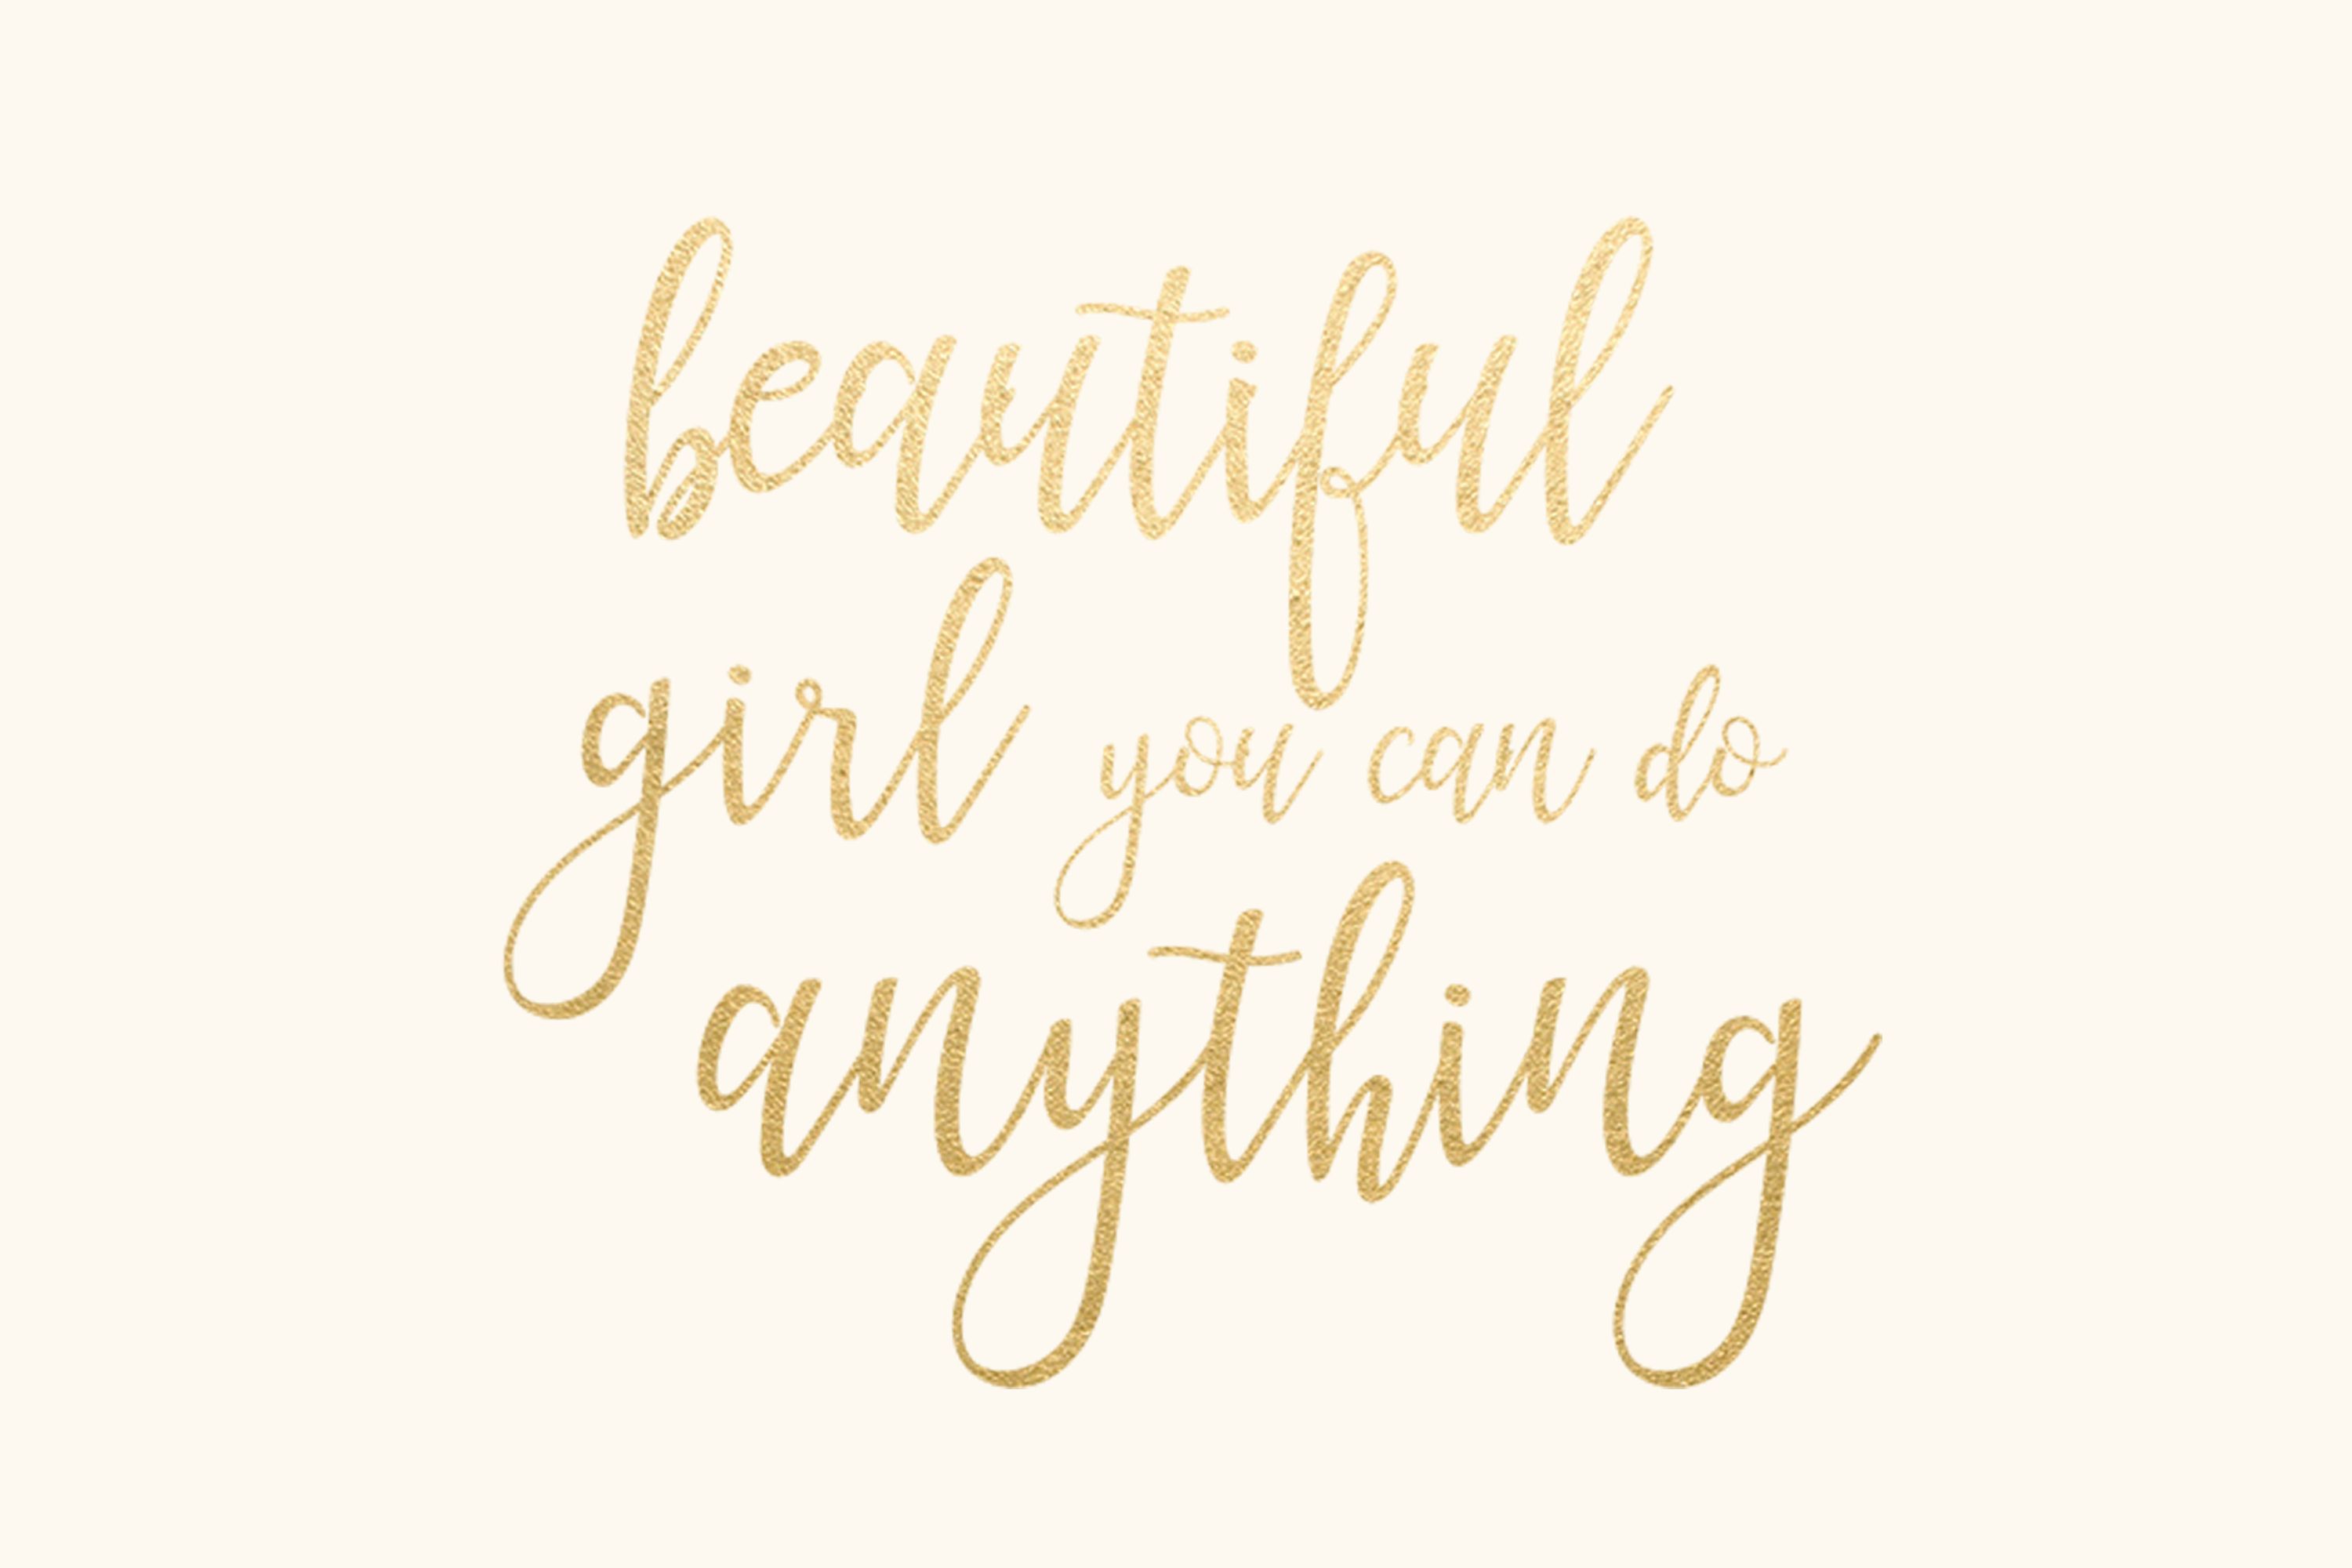 Beautiful Girl You Can Do Anything Gold Foil Quote Desktop